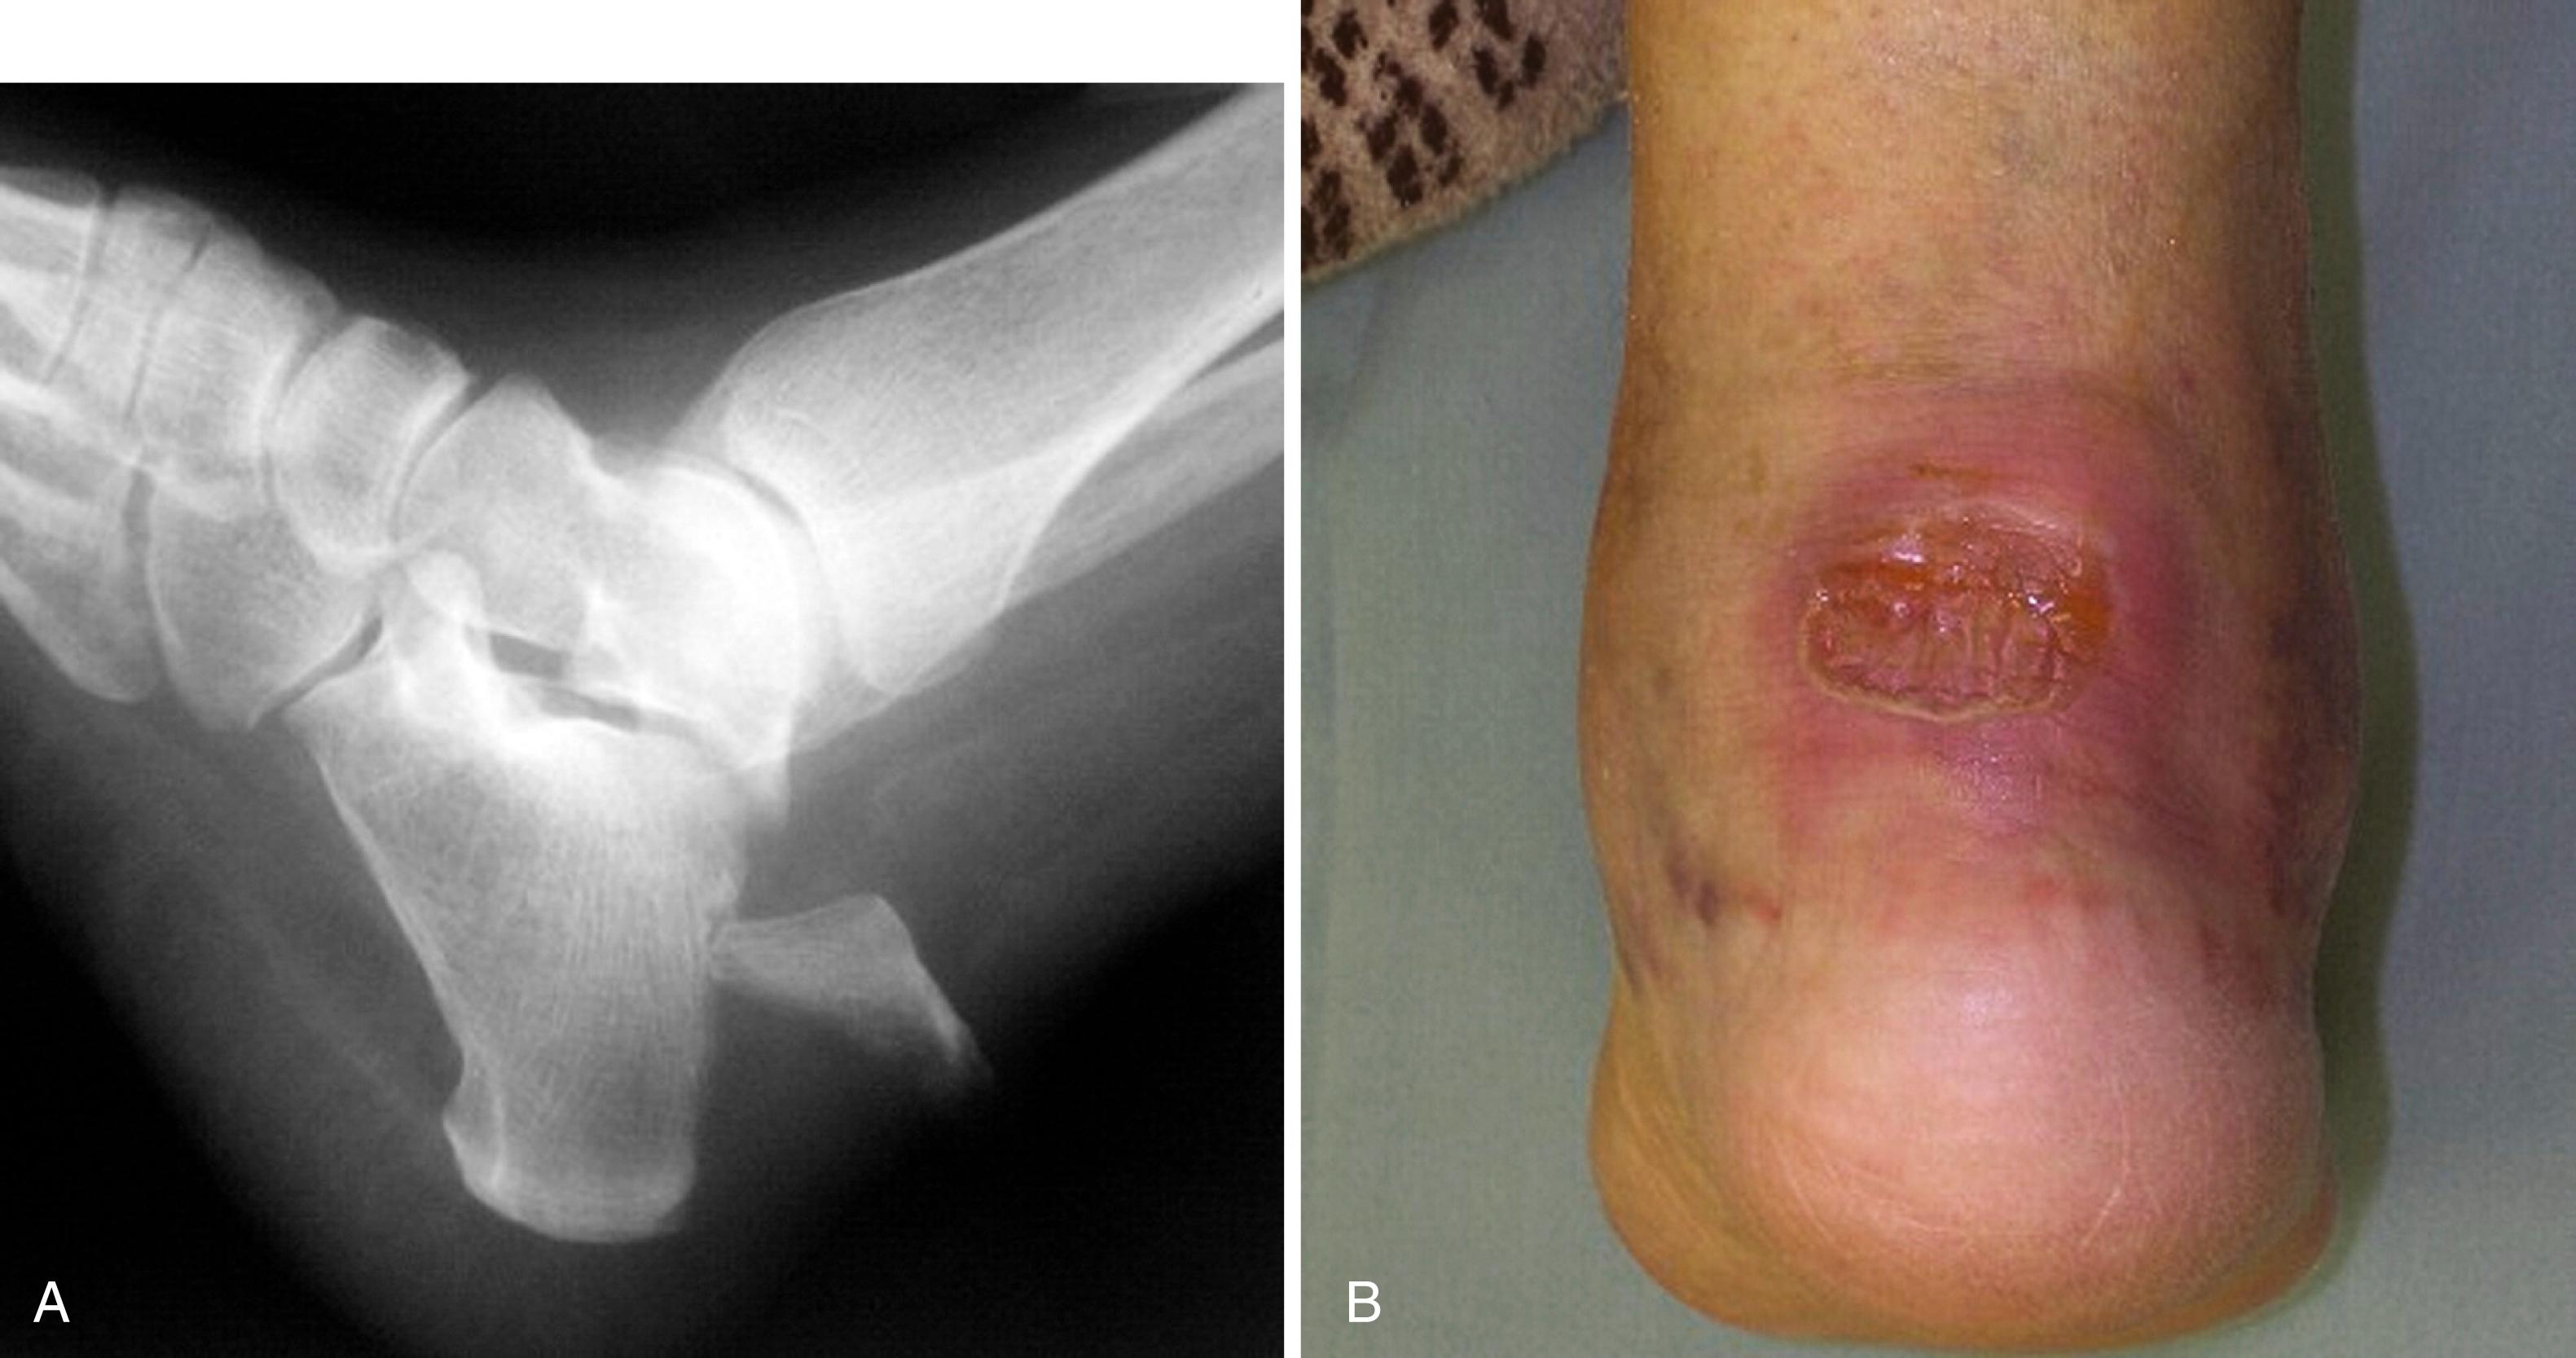 FIGURE 89.31, A, Calcaneal avulsion with large fragment. B, Open wound on posterior heel that developed when fracture was not treated expediently.